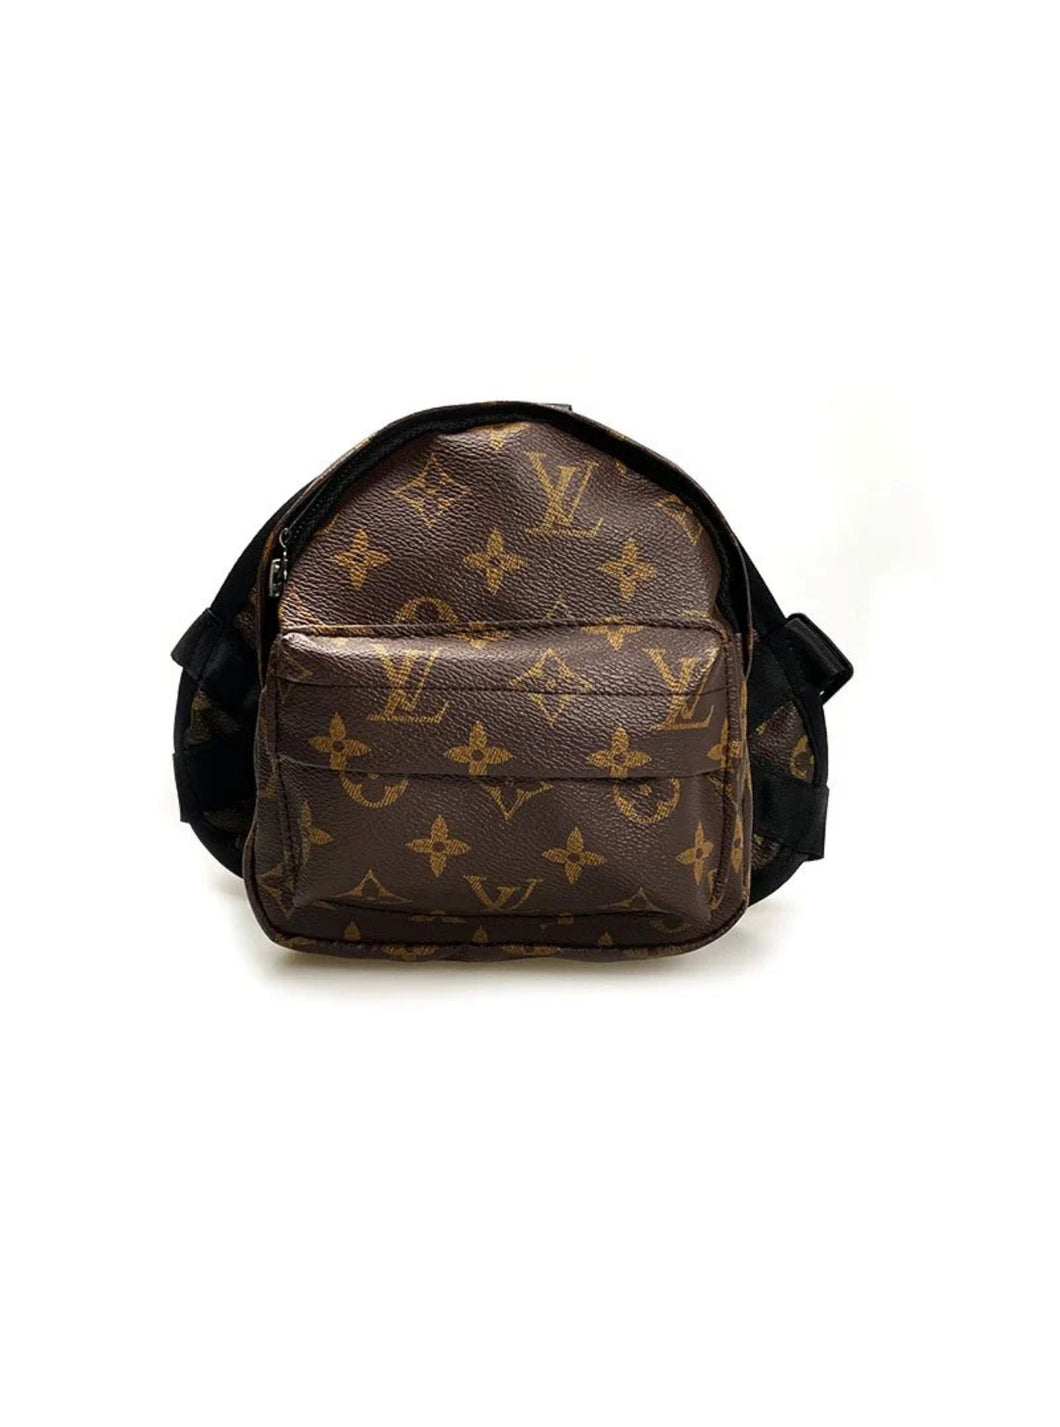 Backpack Luv 2 sizes available